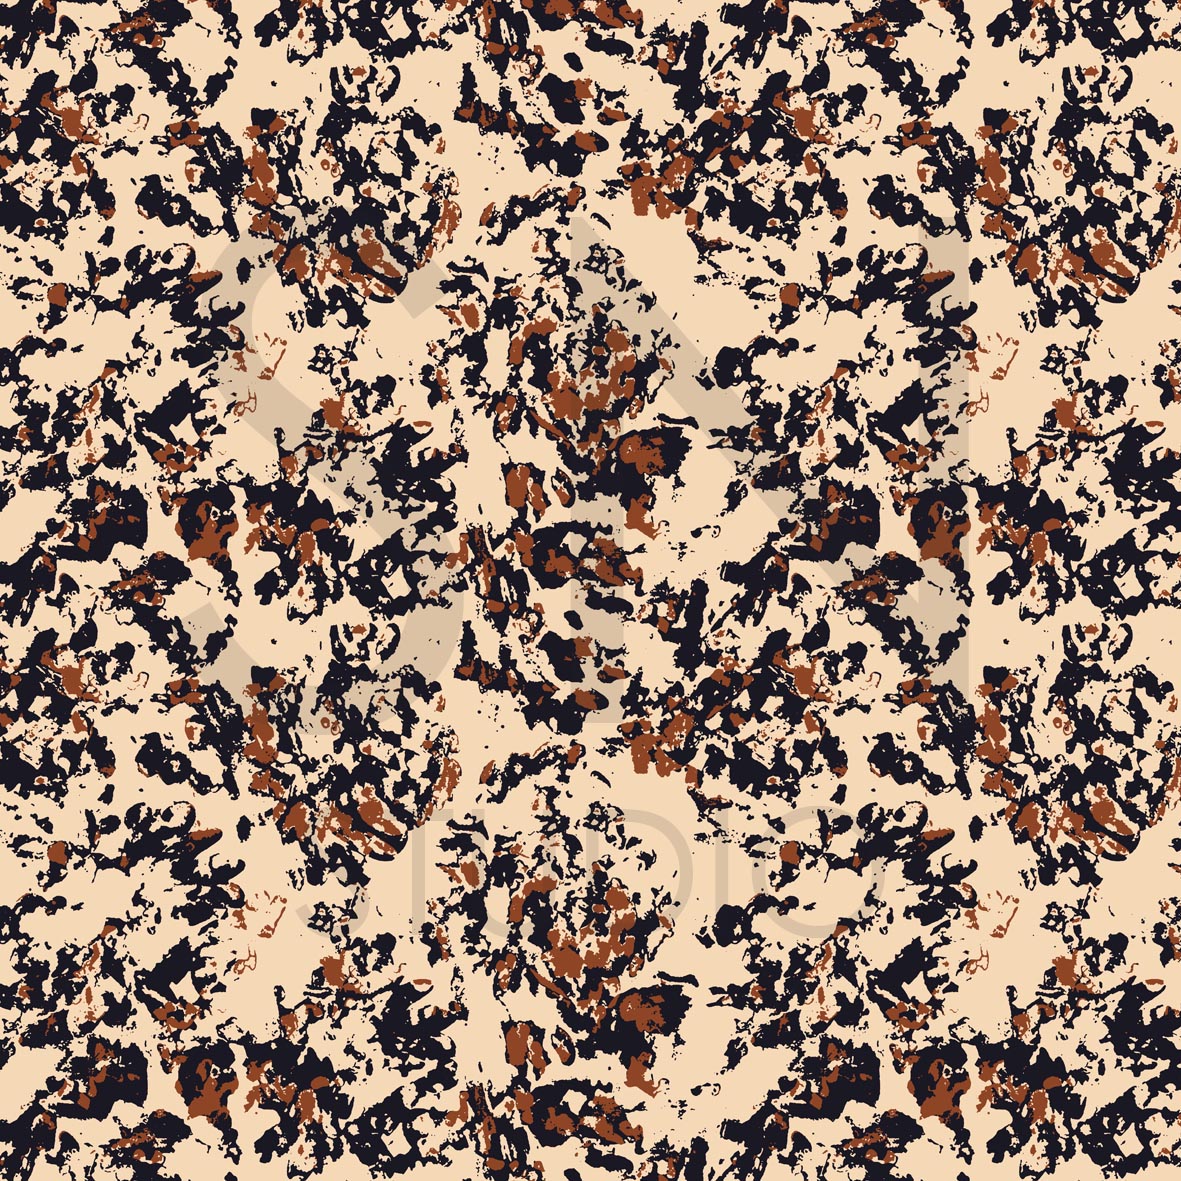 This unique pattern infuses a touch of the exotic into your creative projects, blending earthy hues with contemporary artistic flair. Perfect for adding a hint of natural elegance and wildlife allure to your fashion choices or interior decor.